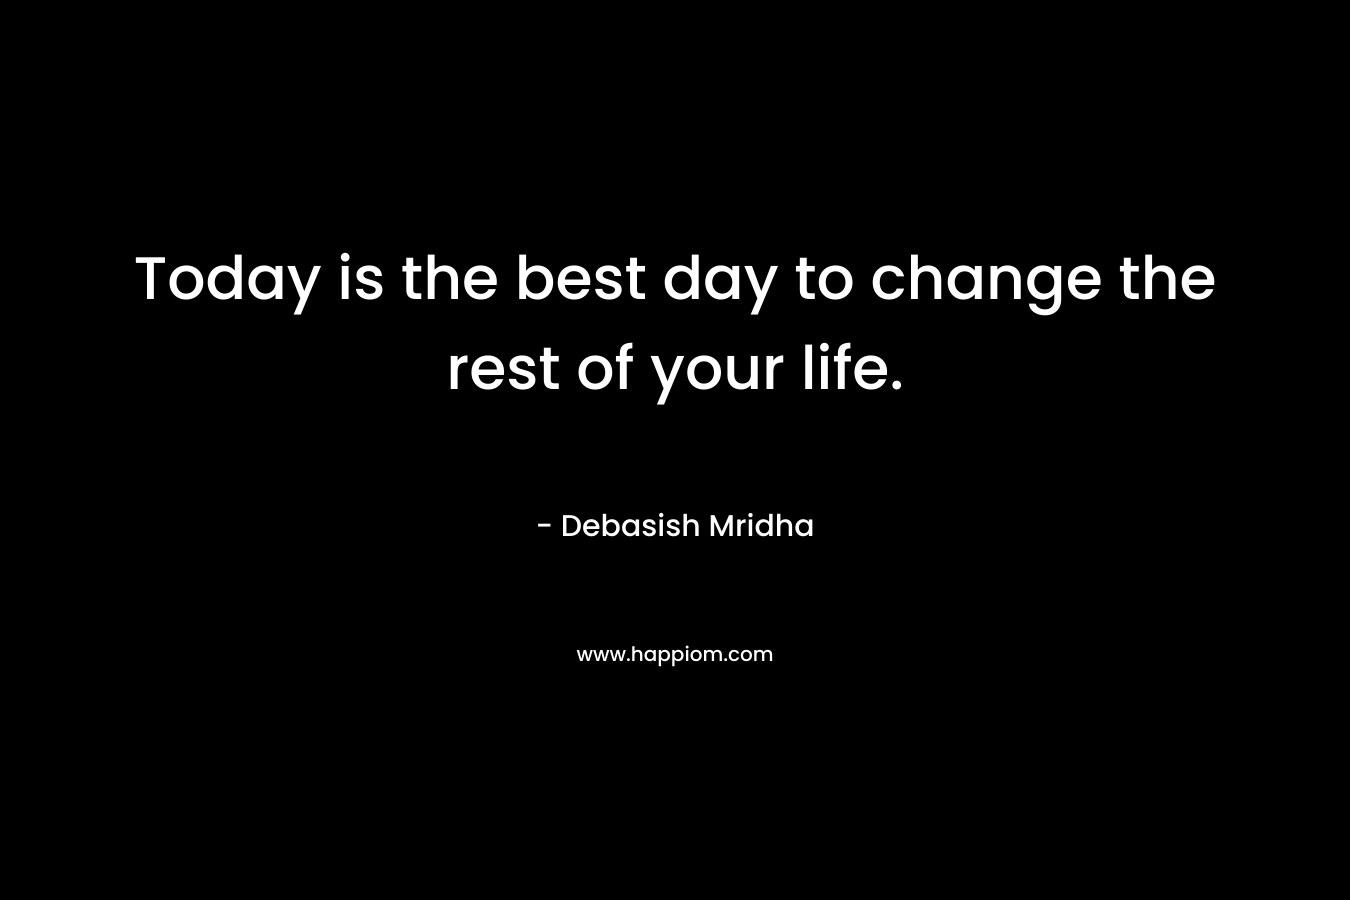 Today is the best day to change the rest of your life.